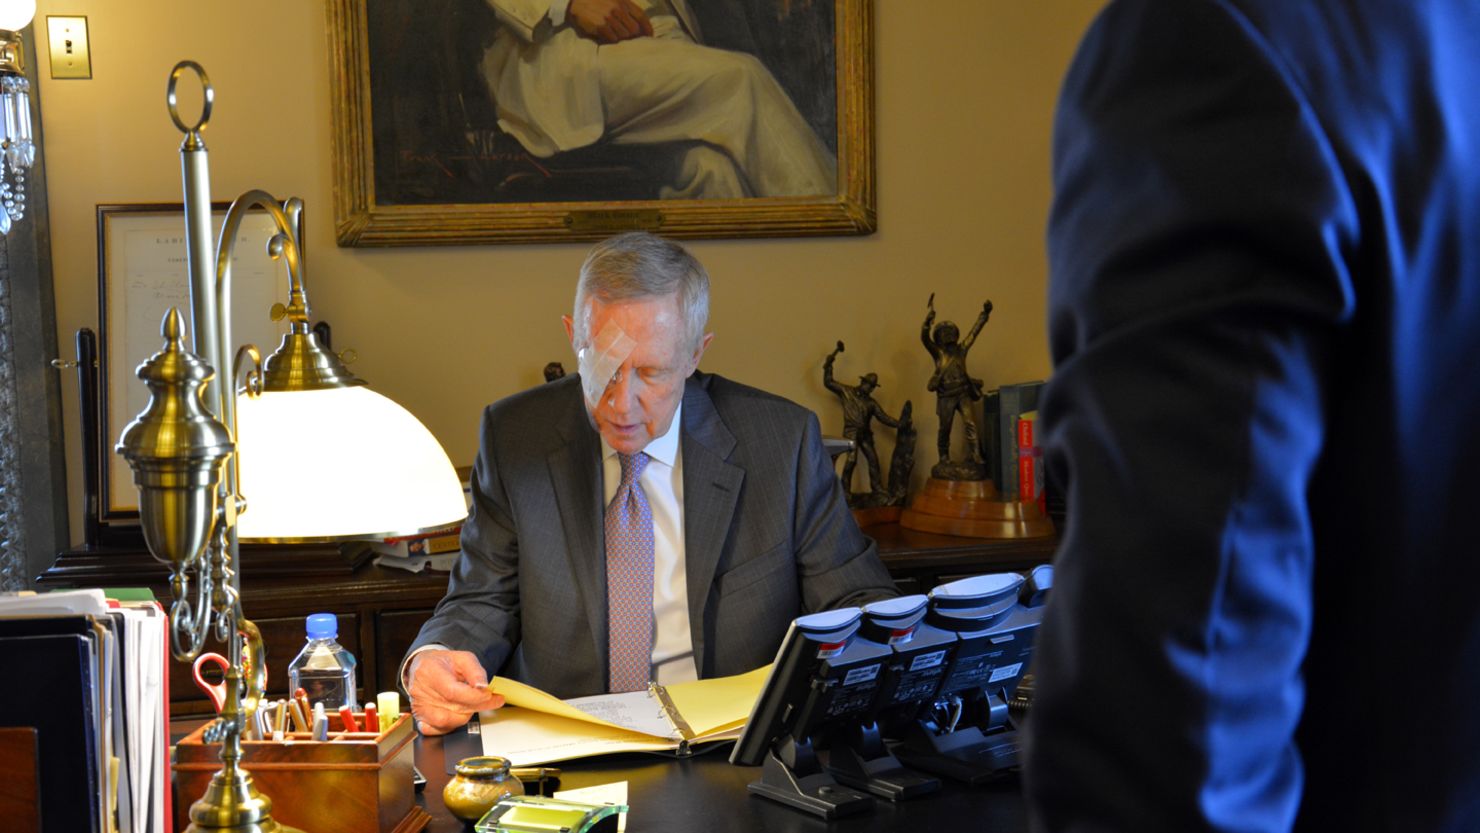 Harry Reid's office said he is resting after a successful eye surgery on Monday.